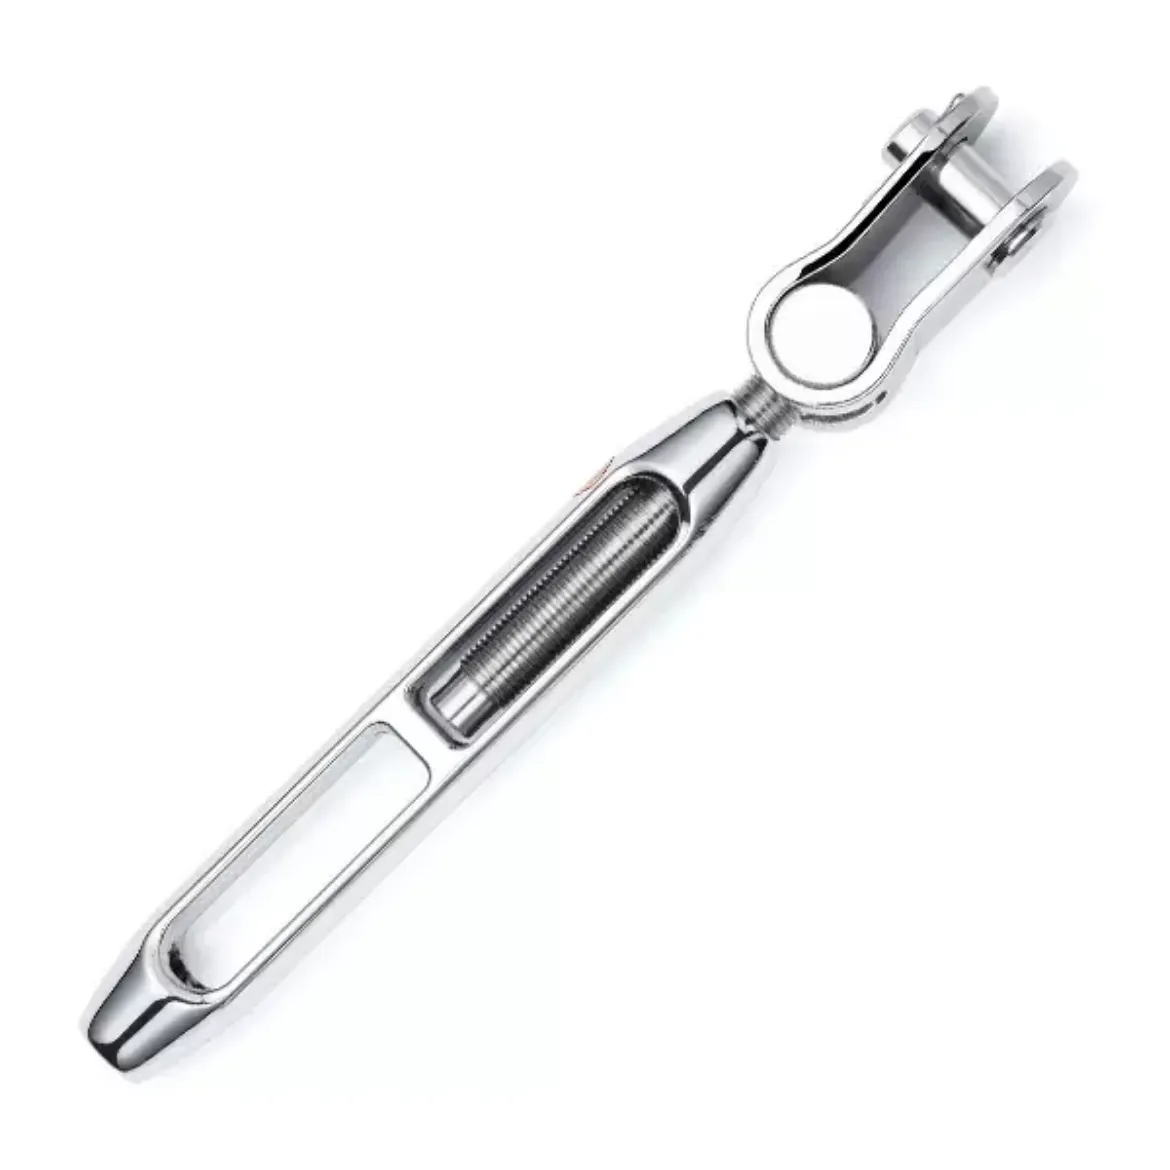 Picture of Sta Lok Turnbuckle UNF Thread Toggle and Blank